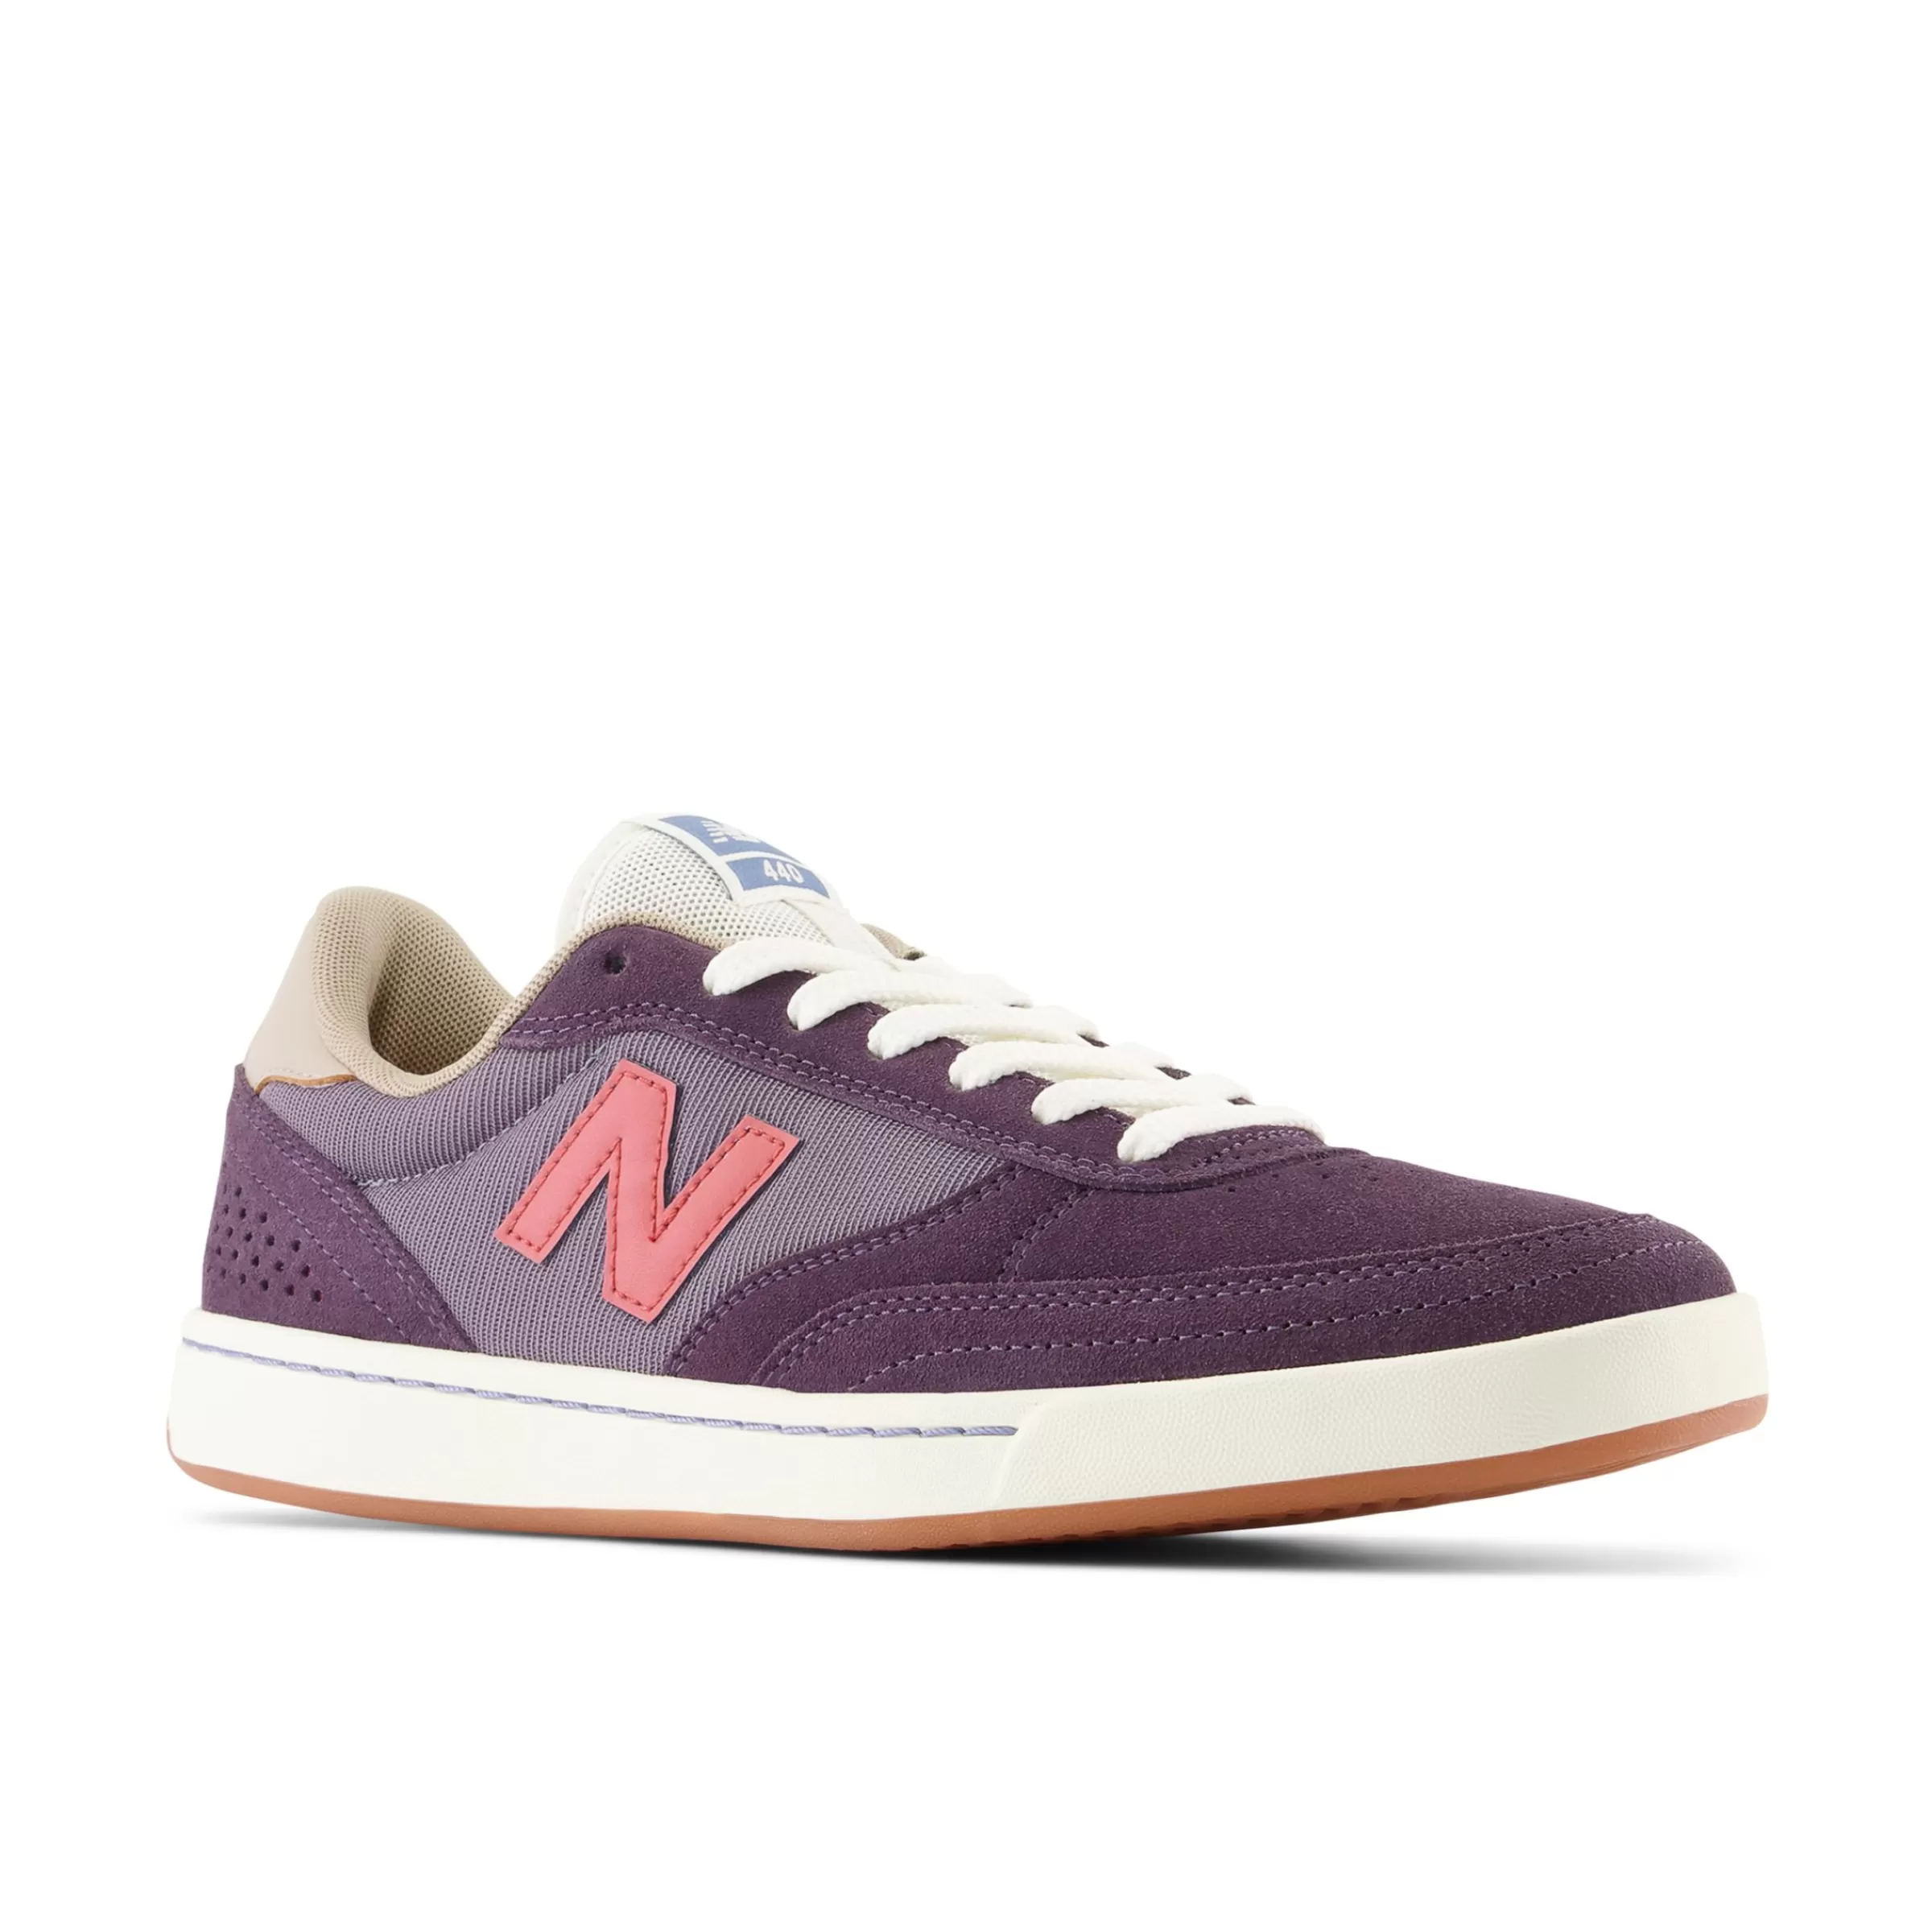 New Balance Chaussures Soldes-NBNumeric440